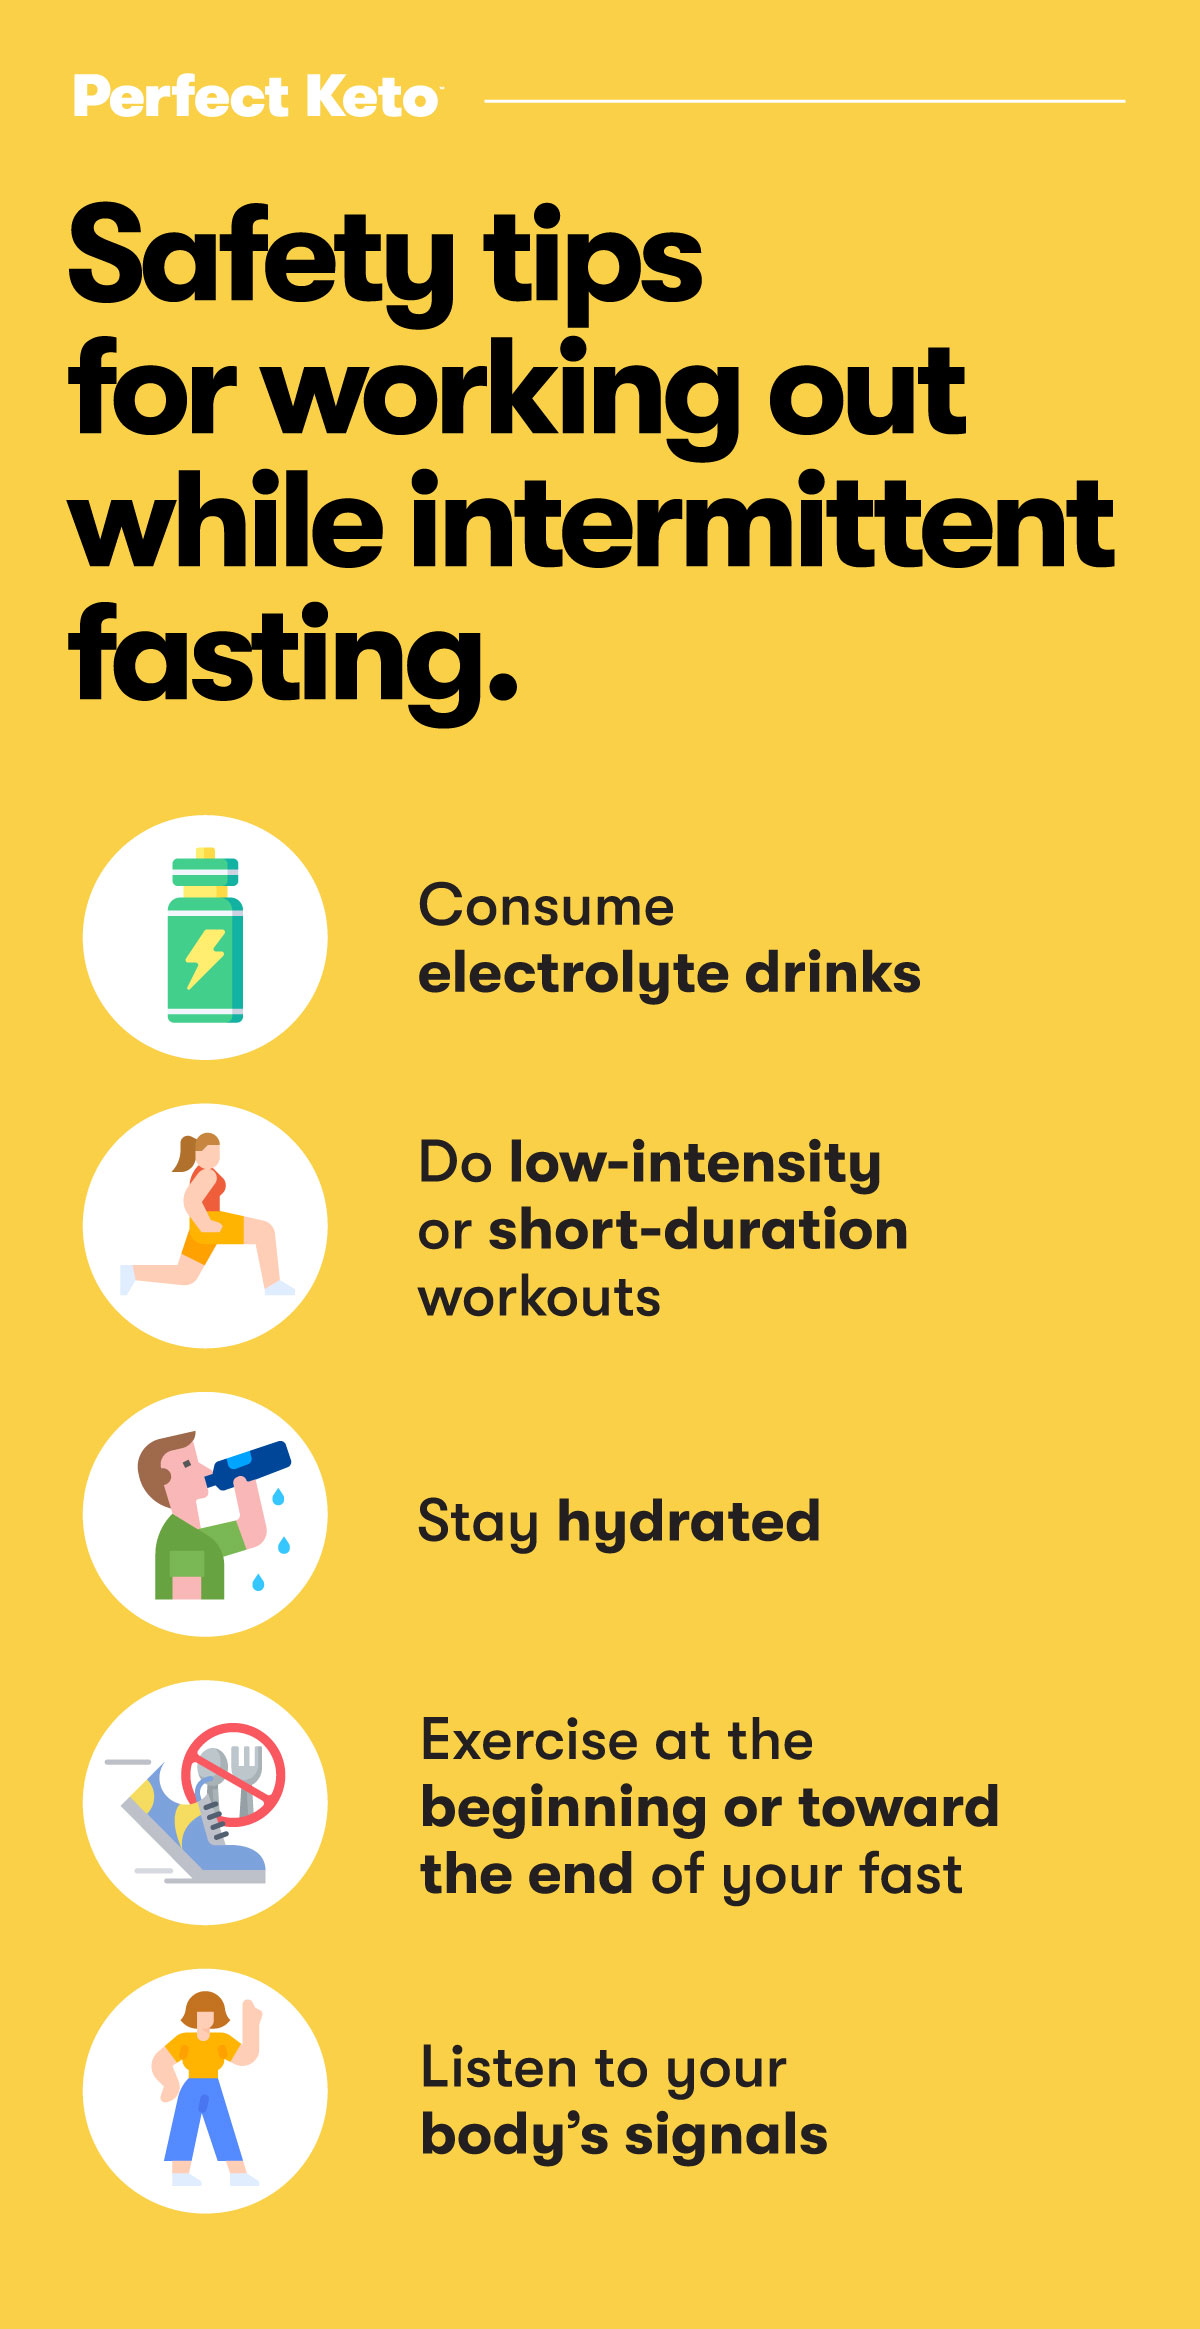 How to Work Out Intermittent Fasting?